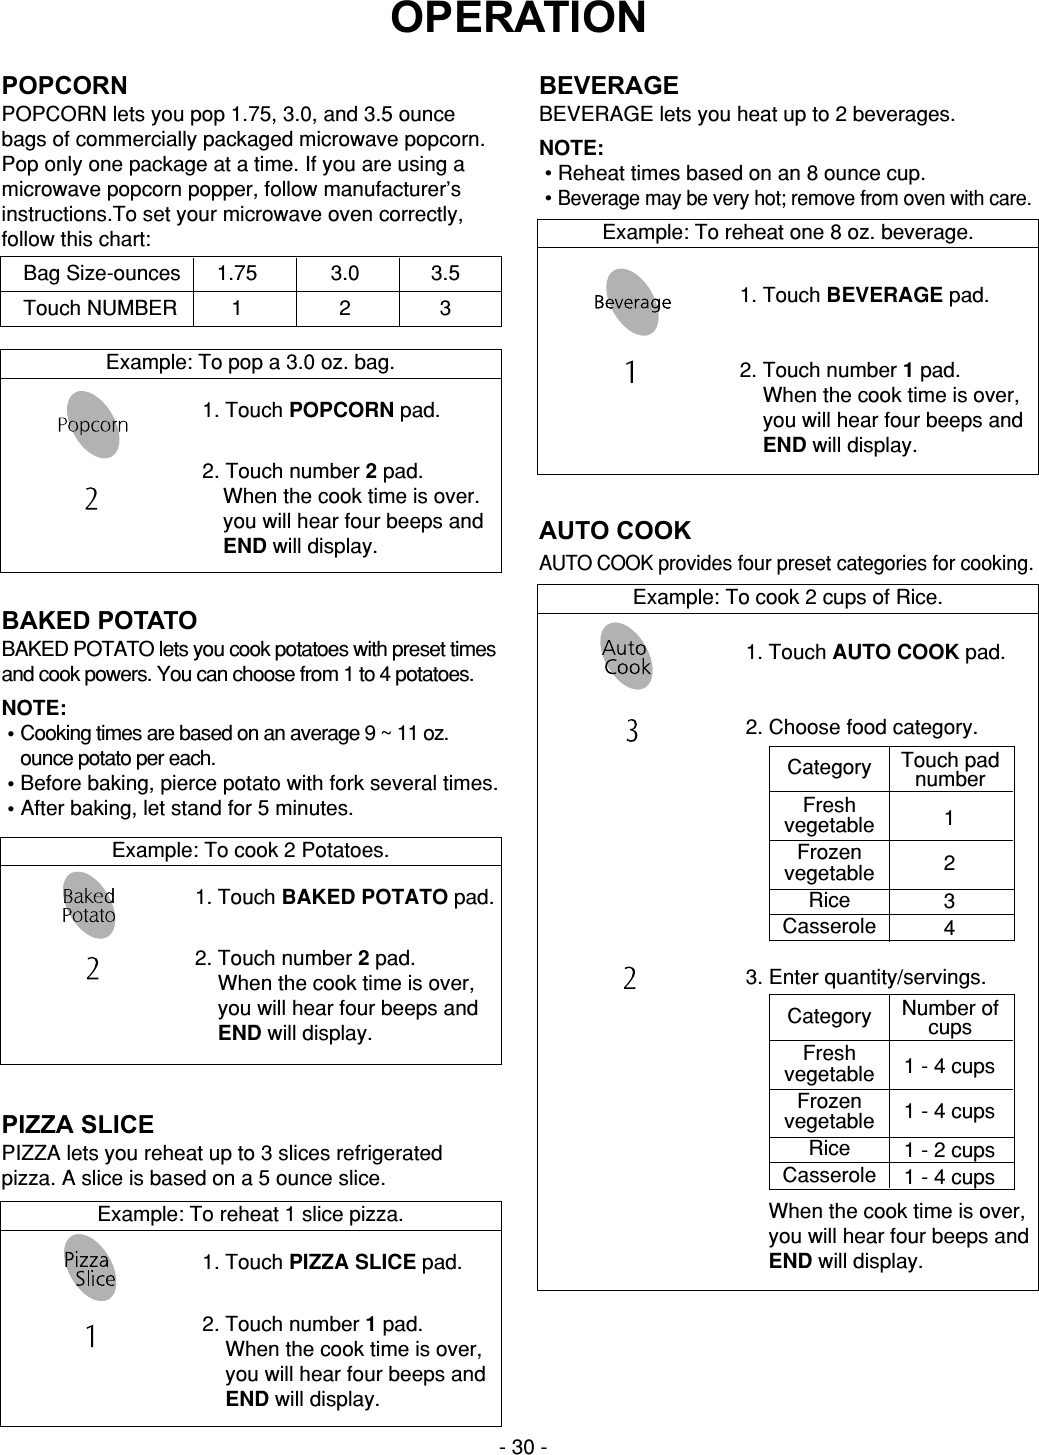 - 30 -OPERATION1. Touch PIZZA SLICE pad.2. Touch number 1 pad.When the cook time is over,you will hear four beeps andEND will display.Example: To reheat 1 slice pizza.1. Touch AUTO COOK pad.2. Choose food category.3. Enter quantity/servings.When the cook time is over, you will hear four beeps andEND will display.Example: To cook 2 cups of Rice.AUTO COOKAUTO COOK provides four preset categories for cooking.Category Touch padnumber1234BAKED POTATOBAKED POTATO lets you cook potatoes with preset timesand cook powers. You can choose from 1 to 4 potatoes.NOTE:• Cooking times are based on an average 9 ~ 11 oz.ounce potato per each.• Before baking, pierce potato with fork several times.• After baking, let stand for 5 minutes.1. Touch BAKED POTATO pad.2. Touch number 2 pad.When the cook time is over,you will hear four beeps andEND will display.POPCORNPOPCORN lets you pop 1.75, 3.0, and 3.5 ouncebags of commercially packaged microwave popcorn.Pop only one package at a time. If you are using amicrowave popcorn popper, follow manufacturer’sinstructions.To set your microwave oven correctly,follow this chart:1. Touch POPCORN pad. 2. Touch number 2pad.When the cook time is over.you will hear four beeps andEND will display.Example: To pop a 3.0 oz. bag.Bag Size-ounces 1.75 3.0 3.5Touch NUMBER  1 2 3PIZZA SLICEPIZZA lets you reheat up to 3 slices refrigeratedpizza. A slice is based on a 5 ounce slice.1. Touch BEVERAGE pad.2. Touch number 1 pad.When the cook time is over,you will hear four beeps andEND will display.Example: To reheat one 8 oz. beverage.BEVERAGEBEVERAGE lets you heat up to 2 beverages.NOTE:• Reheat times based on an 8 ounce cup.• Beverage may be very hot; remove from oven with care.Example: To cook 2 Potatoes.FreshvegetableFrozenvegetableRiceCasseroleCategory Number of cups1 - 4 cups1 - 4 cups1 - 2 cups 1 - 4 cupsFreshvegetableFrozenvegetableRiceCasserole